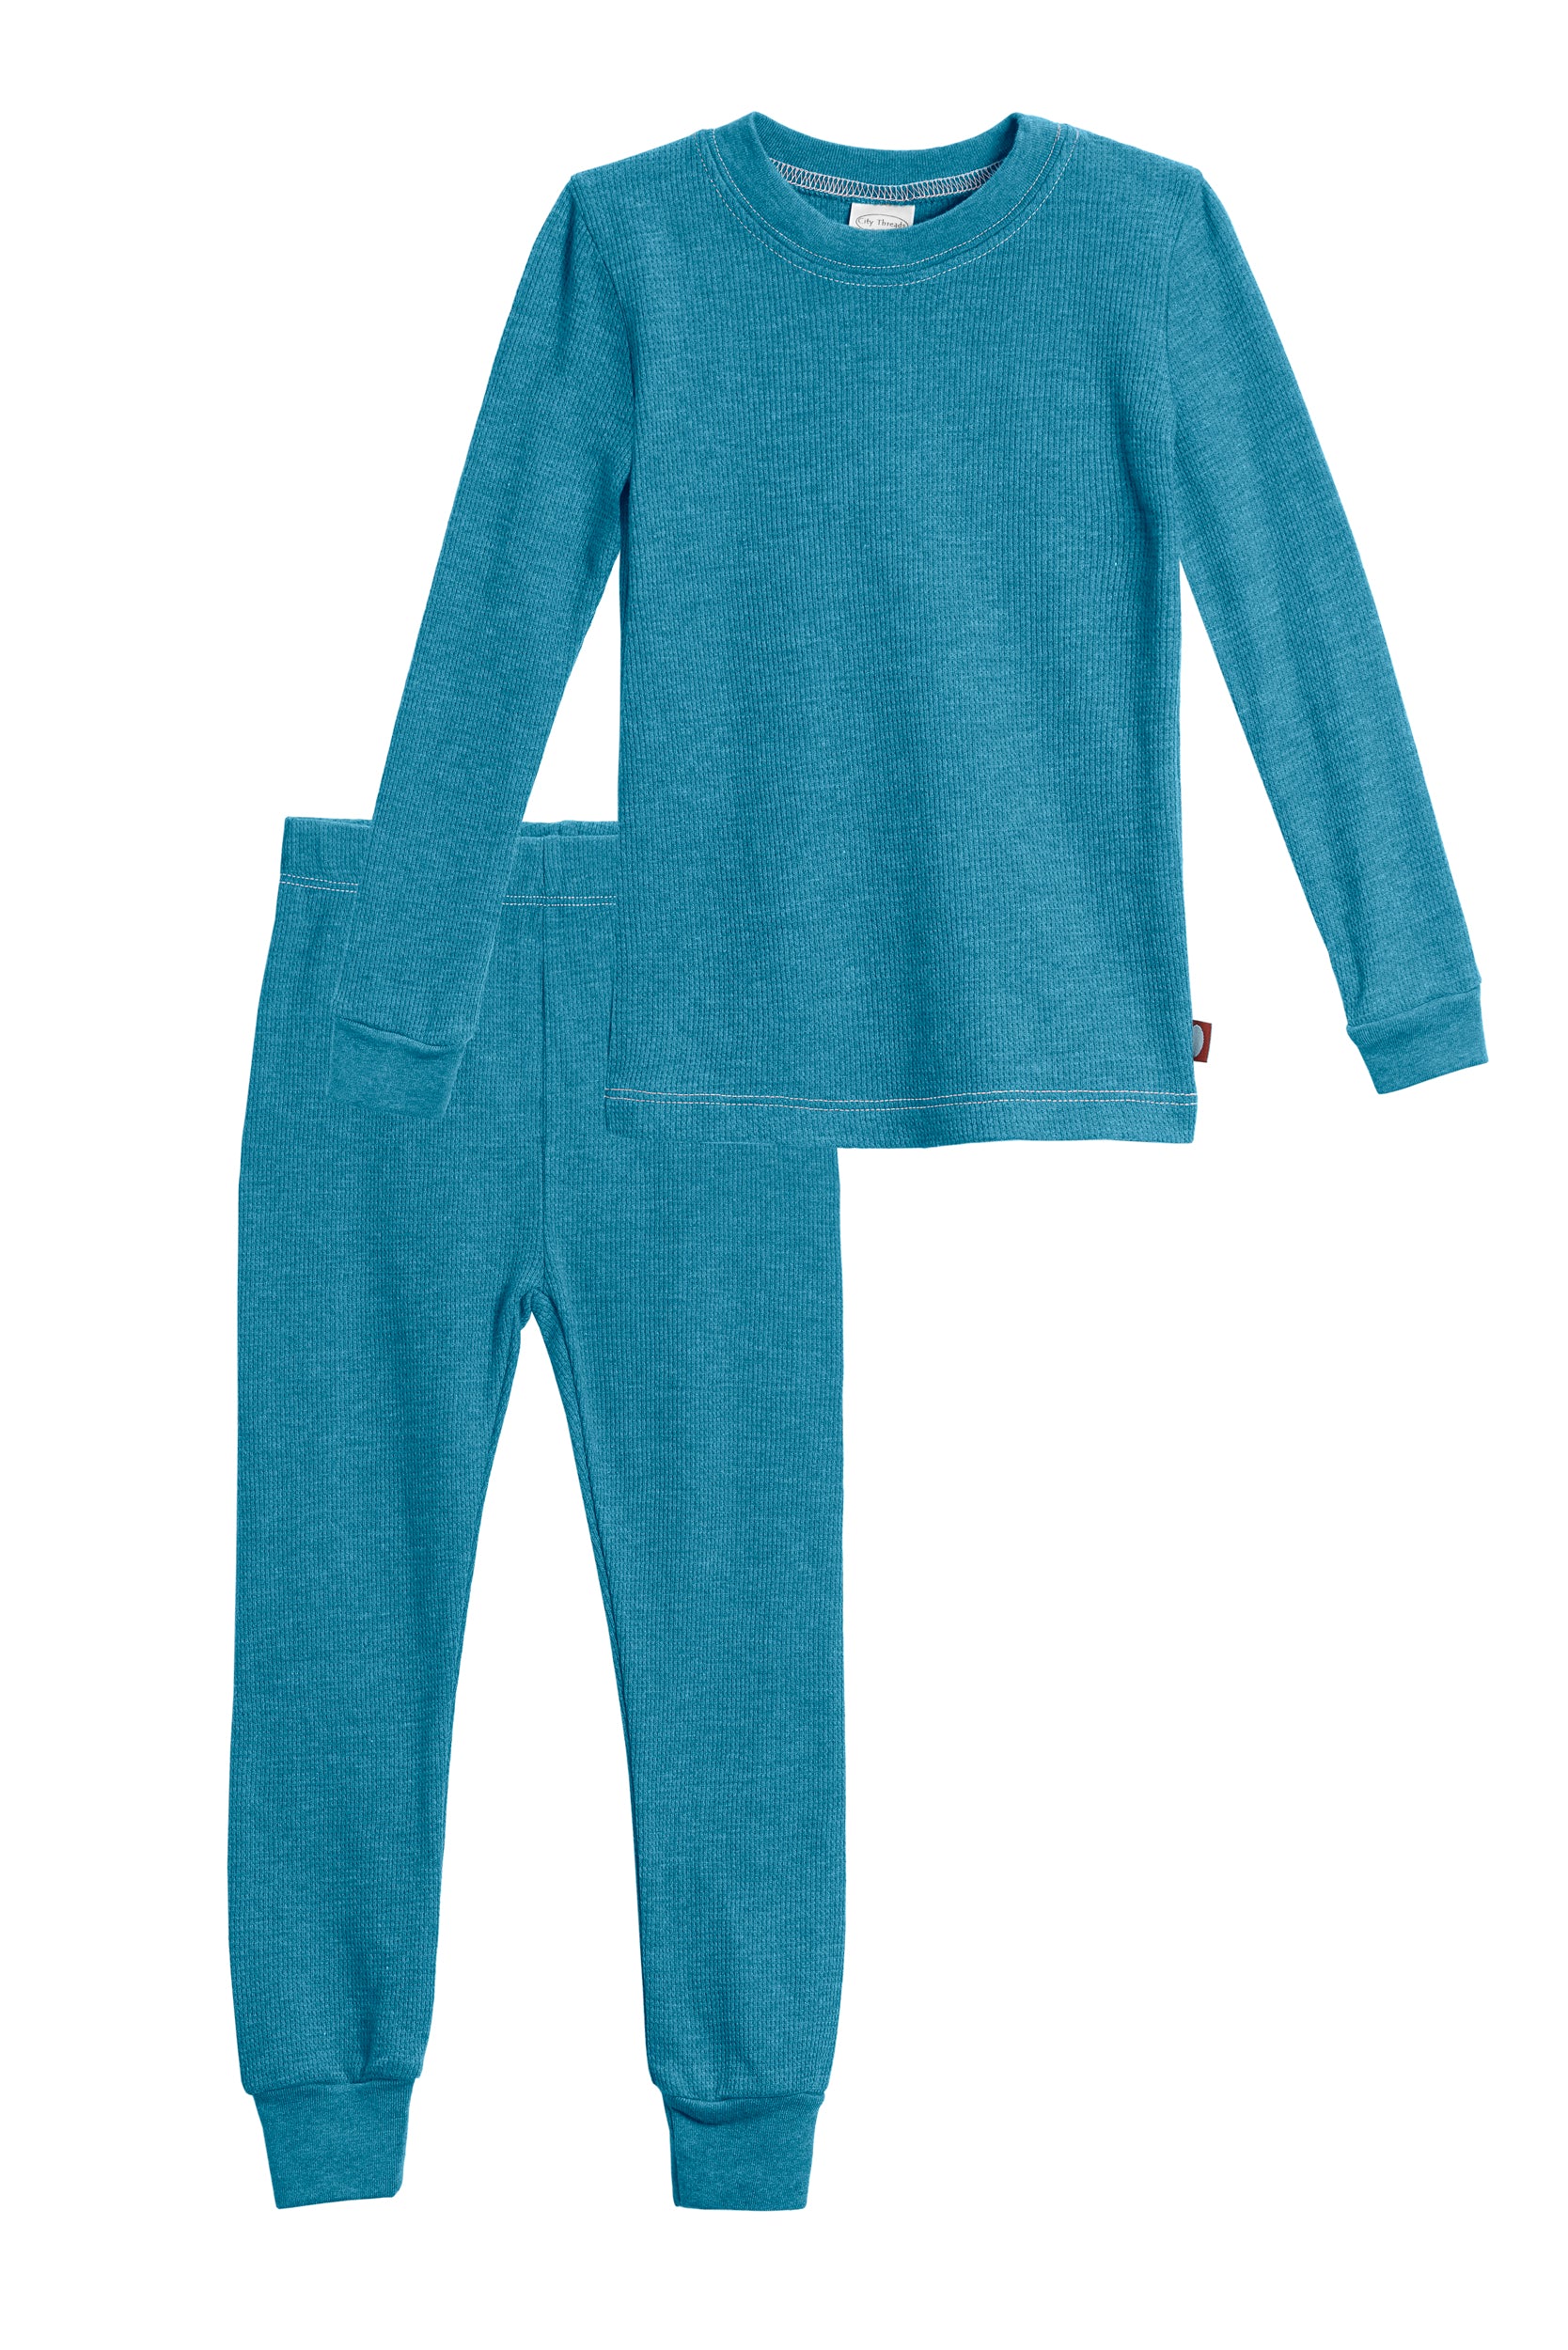 Girls Soft & Cozy Thermal 2-Piece Long Johns | Teal w- Light Pink Stitch